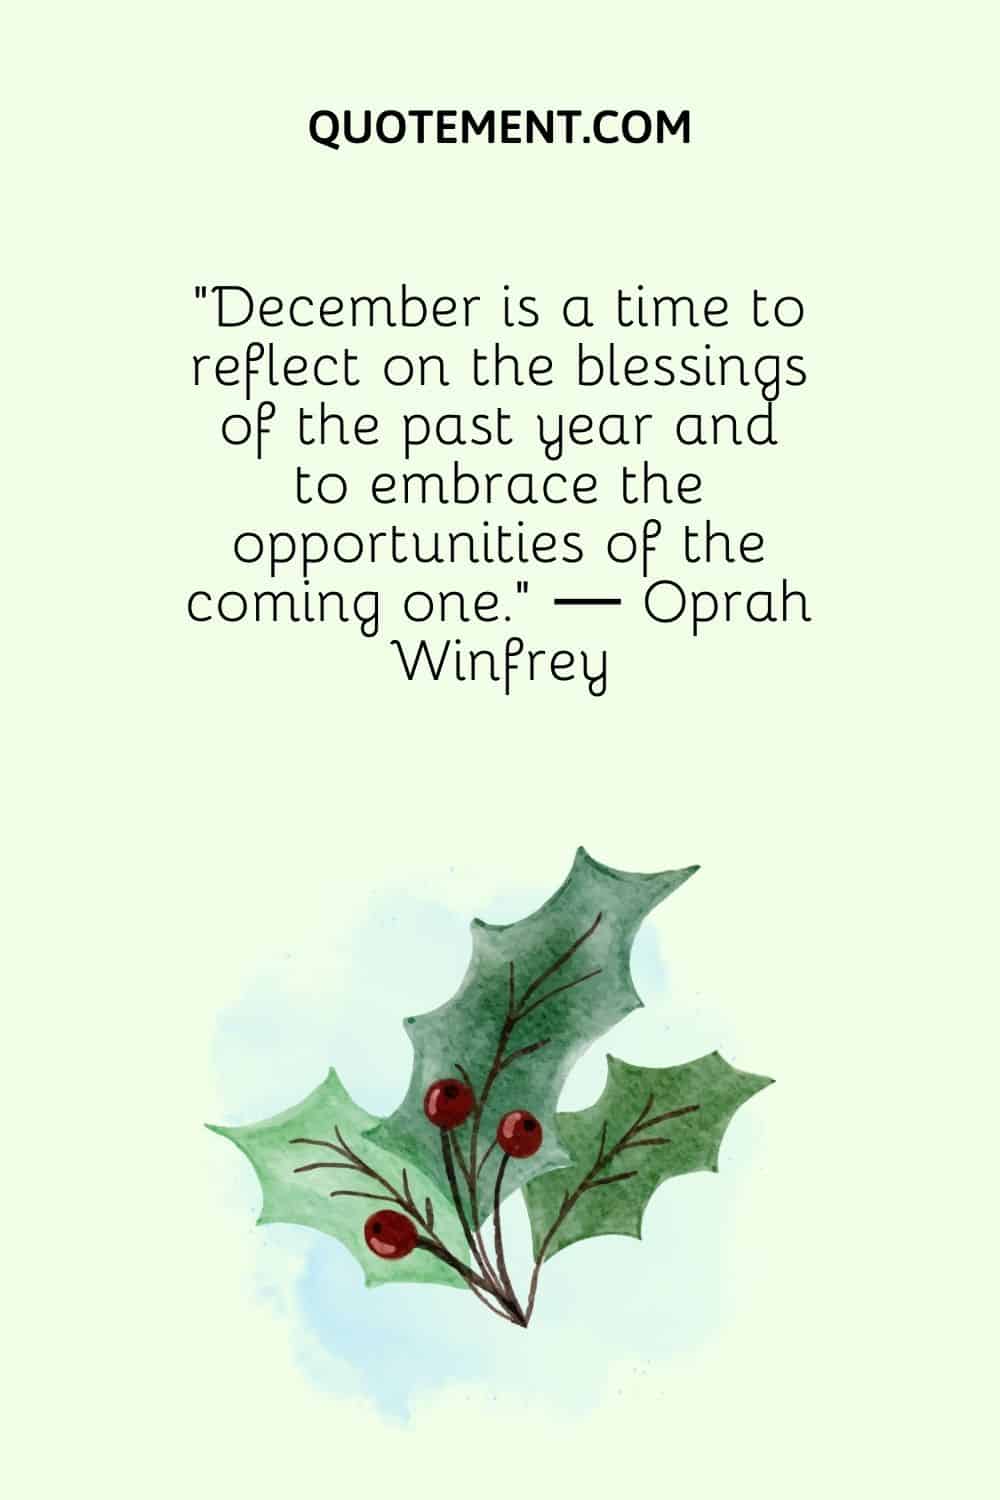 image of leaves representing holiday inspirational quote